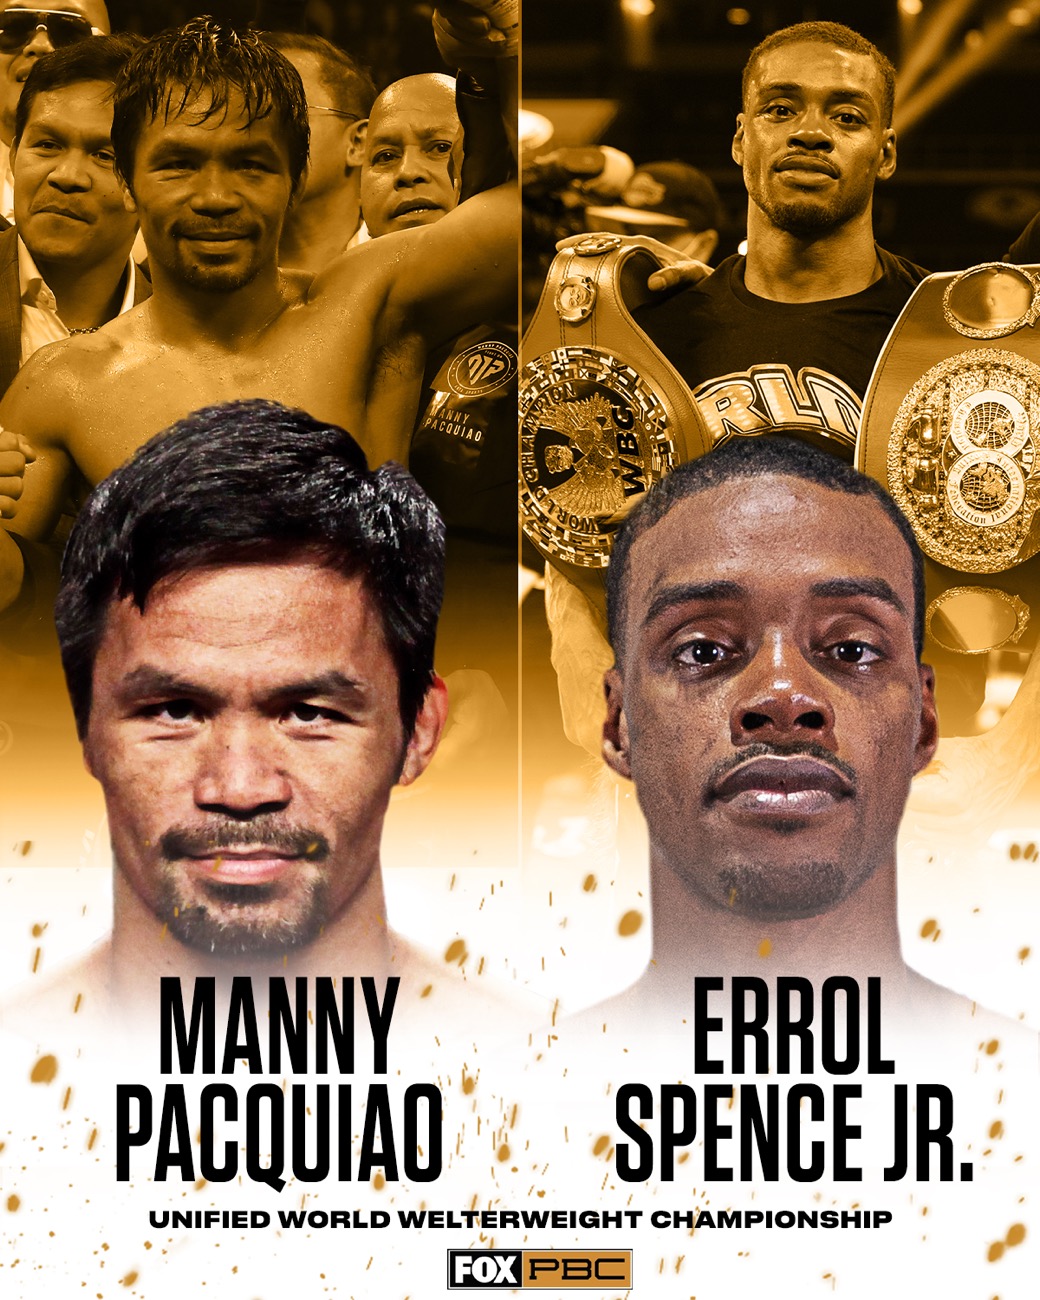 Spence's youth will carry him to victory over Pacquiao says Julio Cesar Martinez